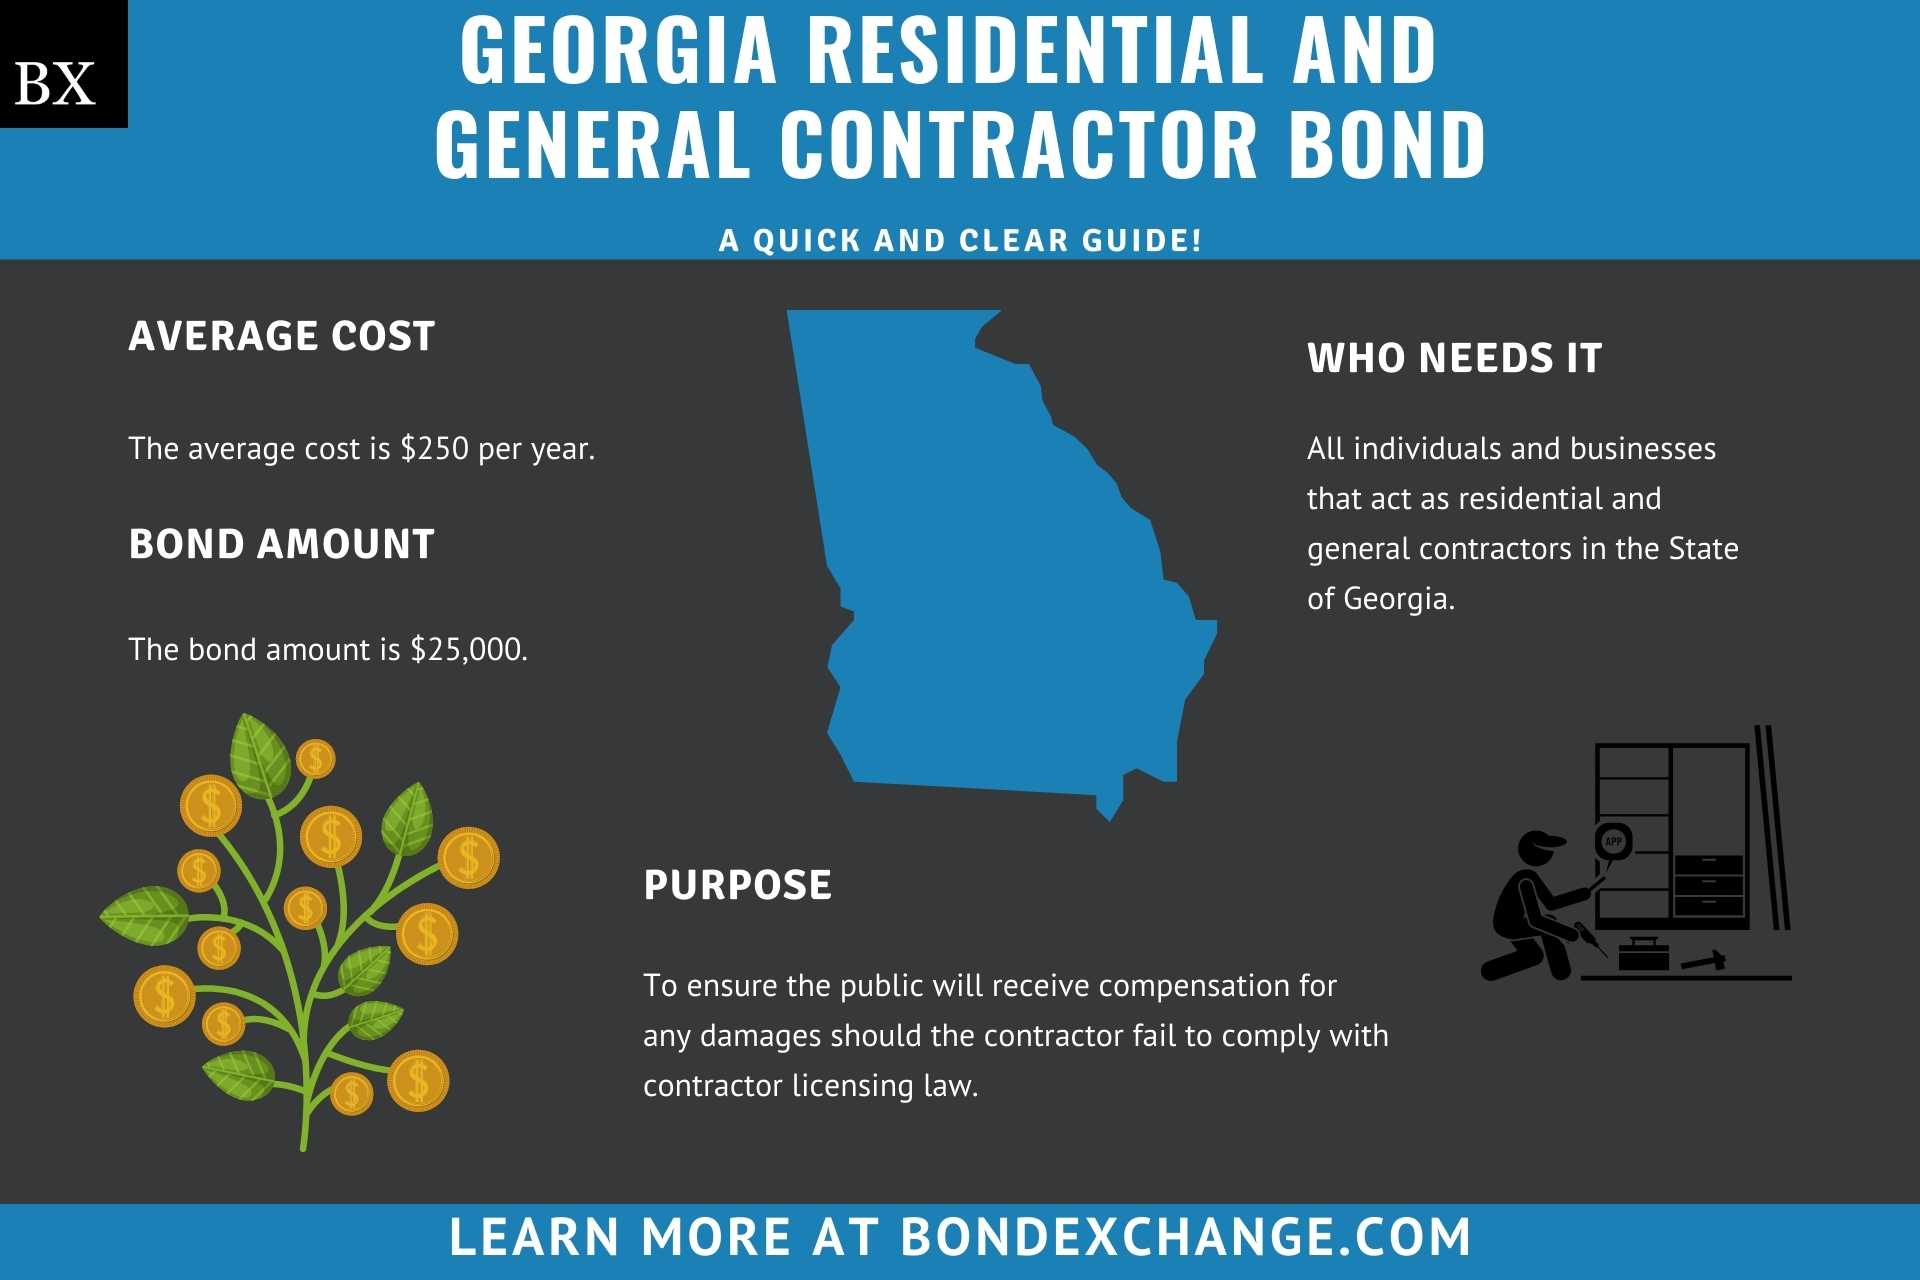 Georgia Residential and General Contractor Bond